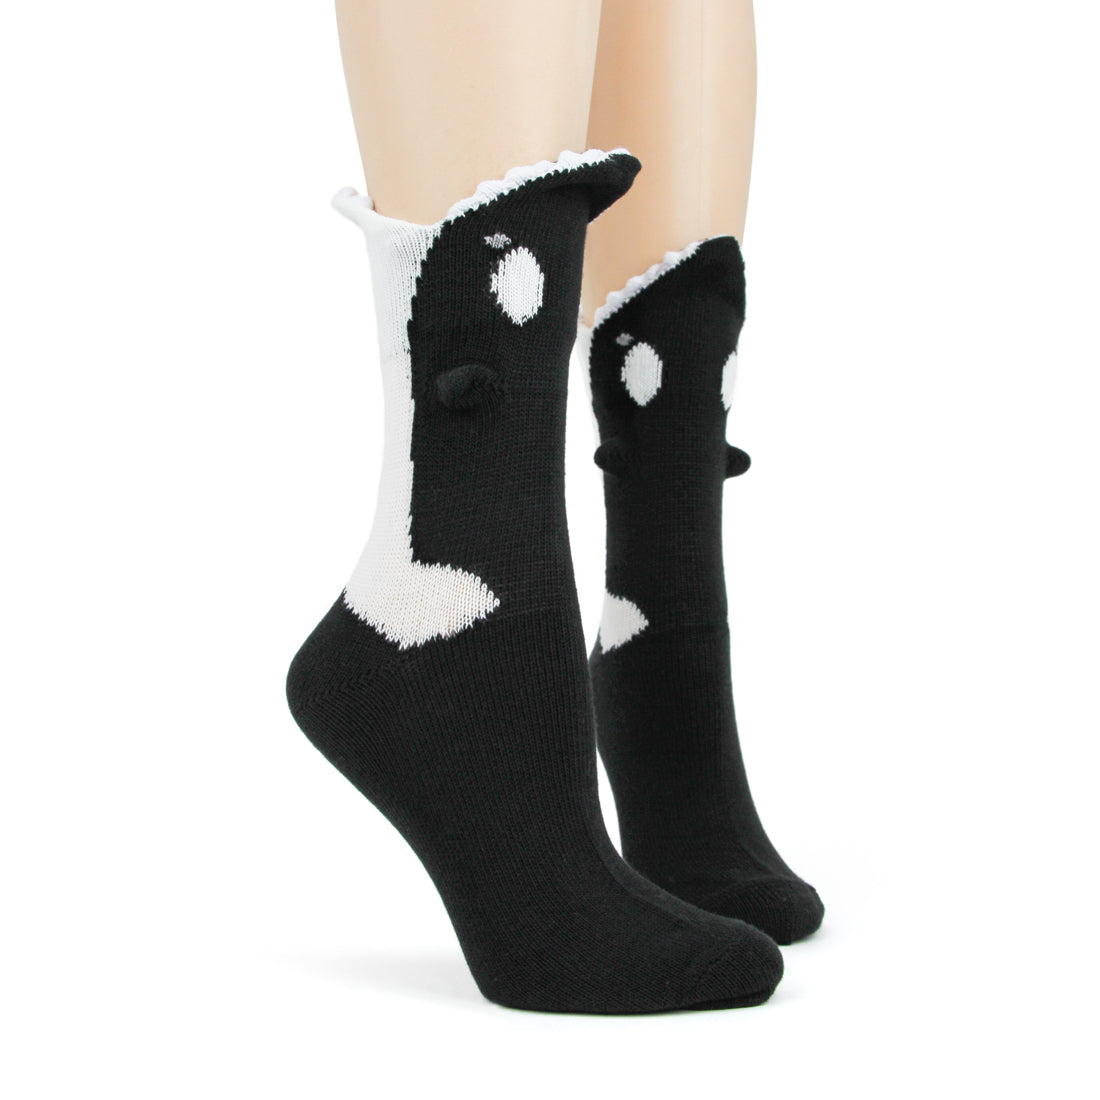 Hungry orcas eat your feet when you wear these orca bite crew socks.